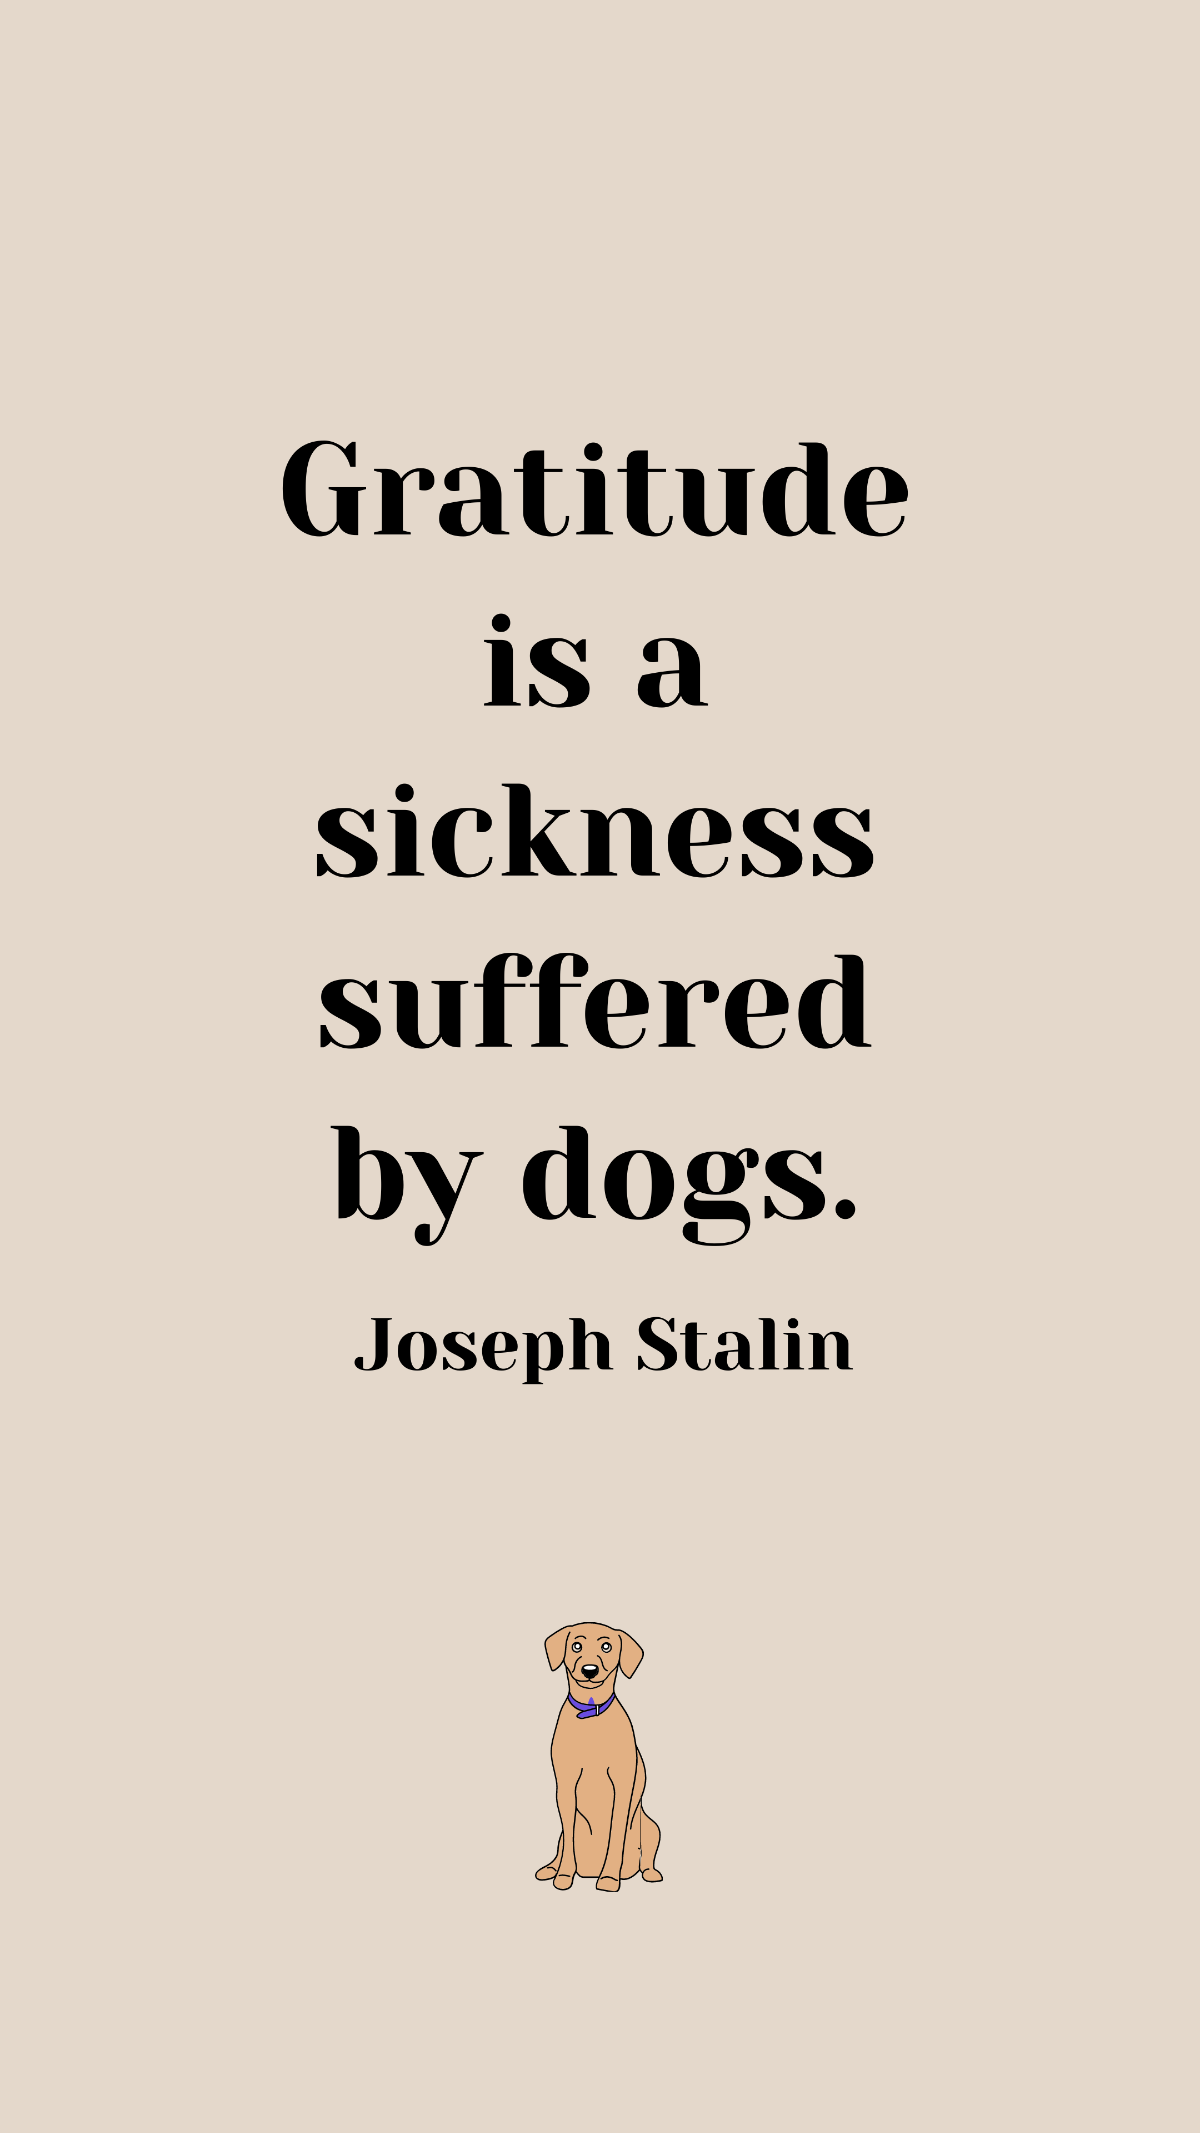 Joseph Stalin - Gratitude is a sickness suffered by dogs.